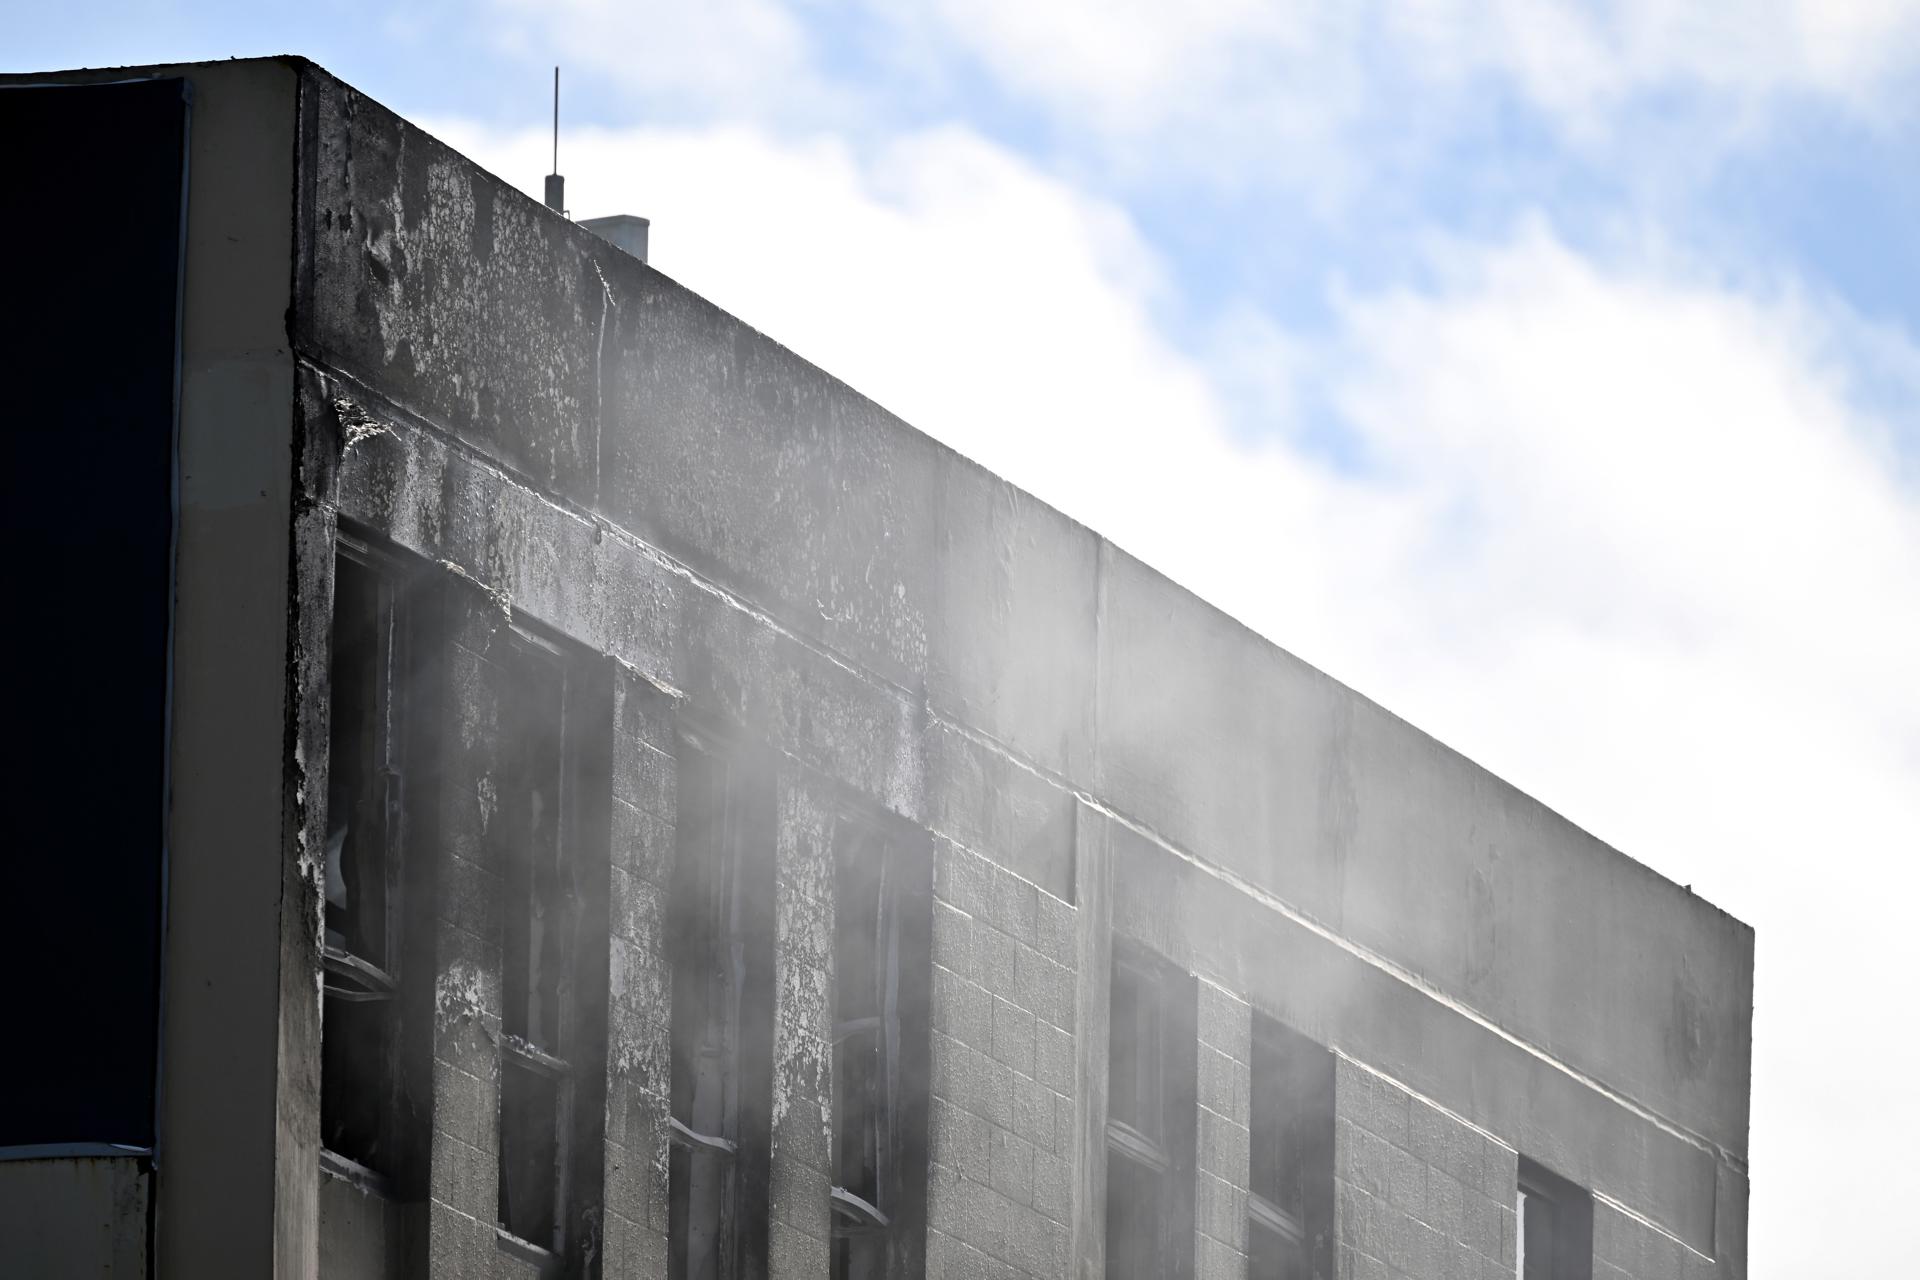 A hostel building shows signs of damage after a fire, in Wellington, New Zealand, 16 May 2023. EFE/EPA/BEN MCKAY AUSTRALIA AND NEW ZEALAND OUT
